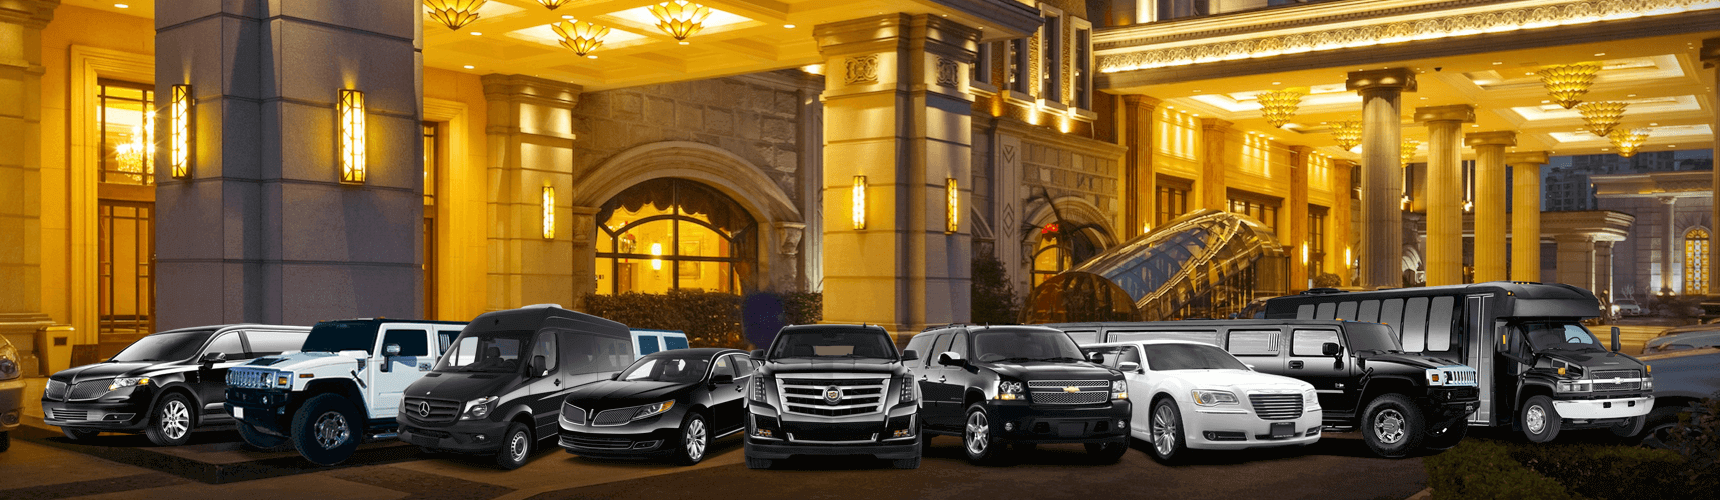 discount limo service prices